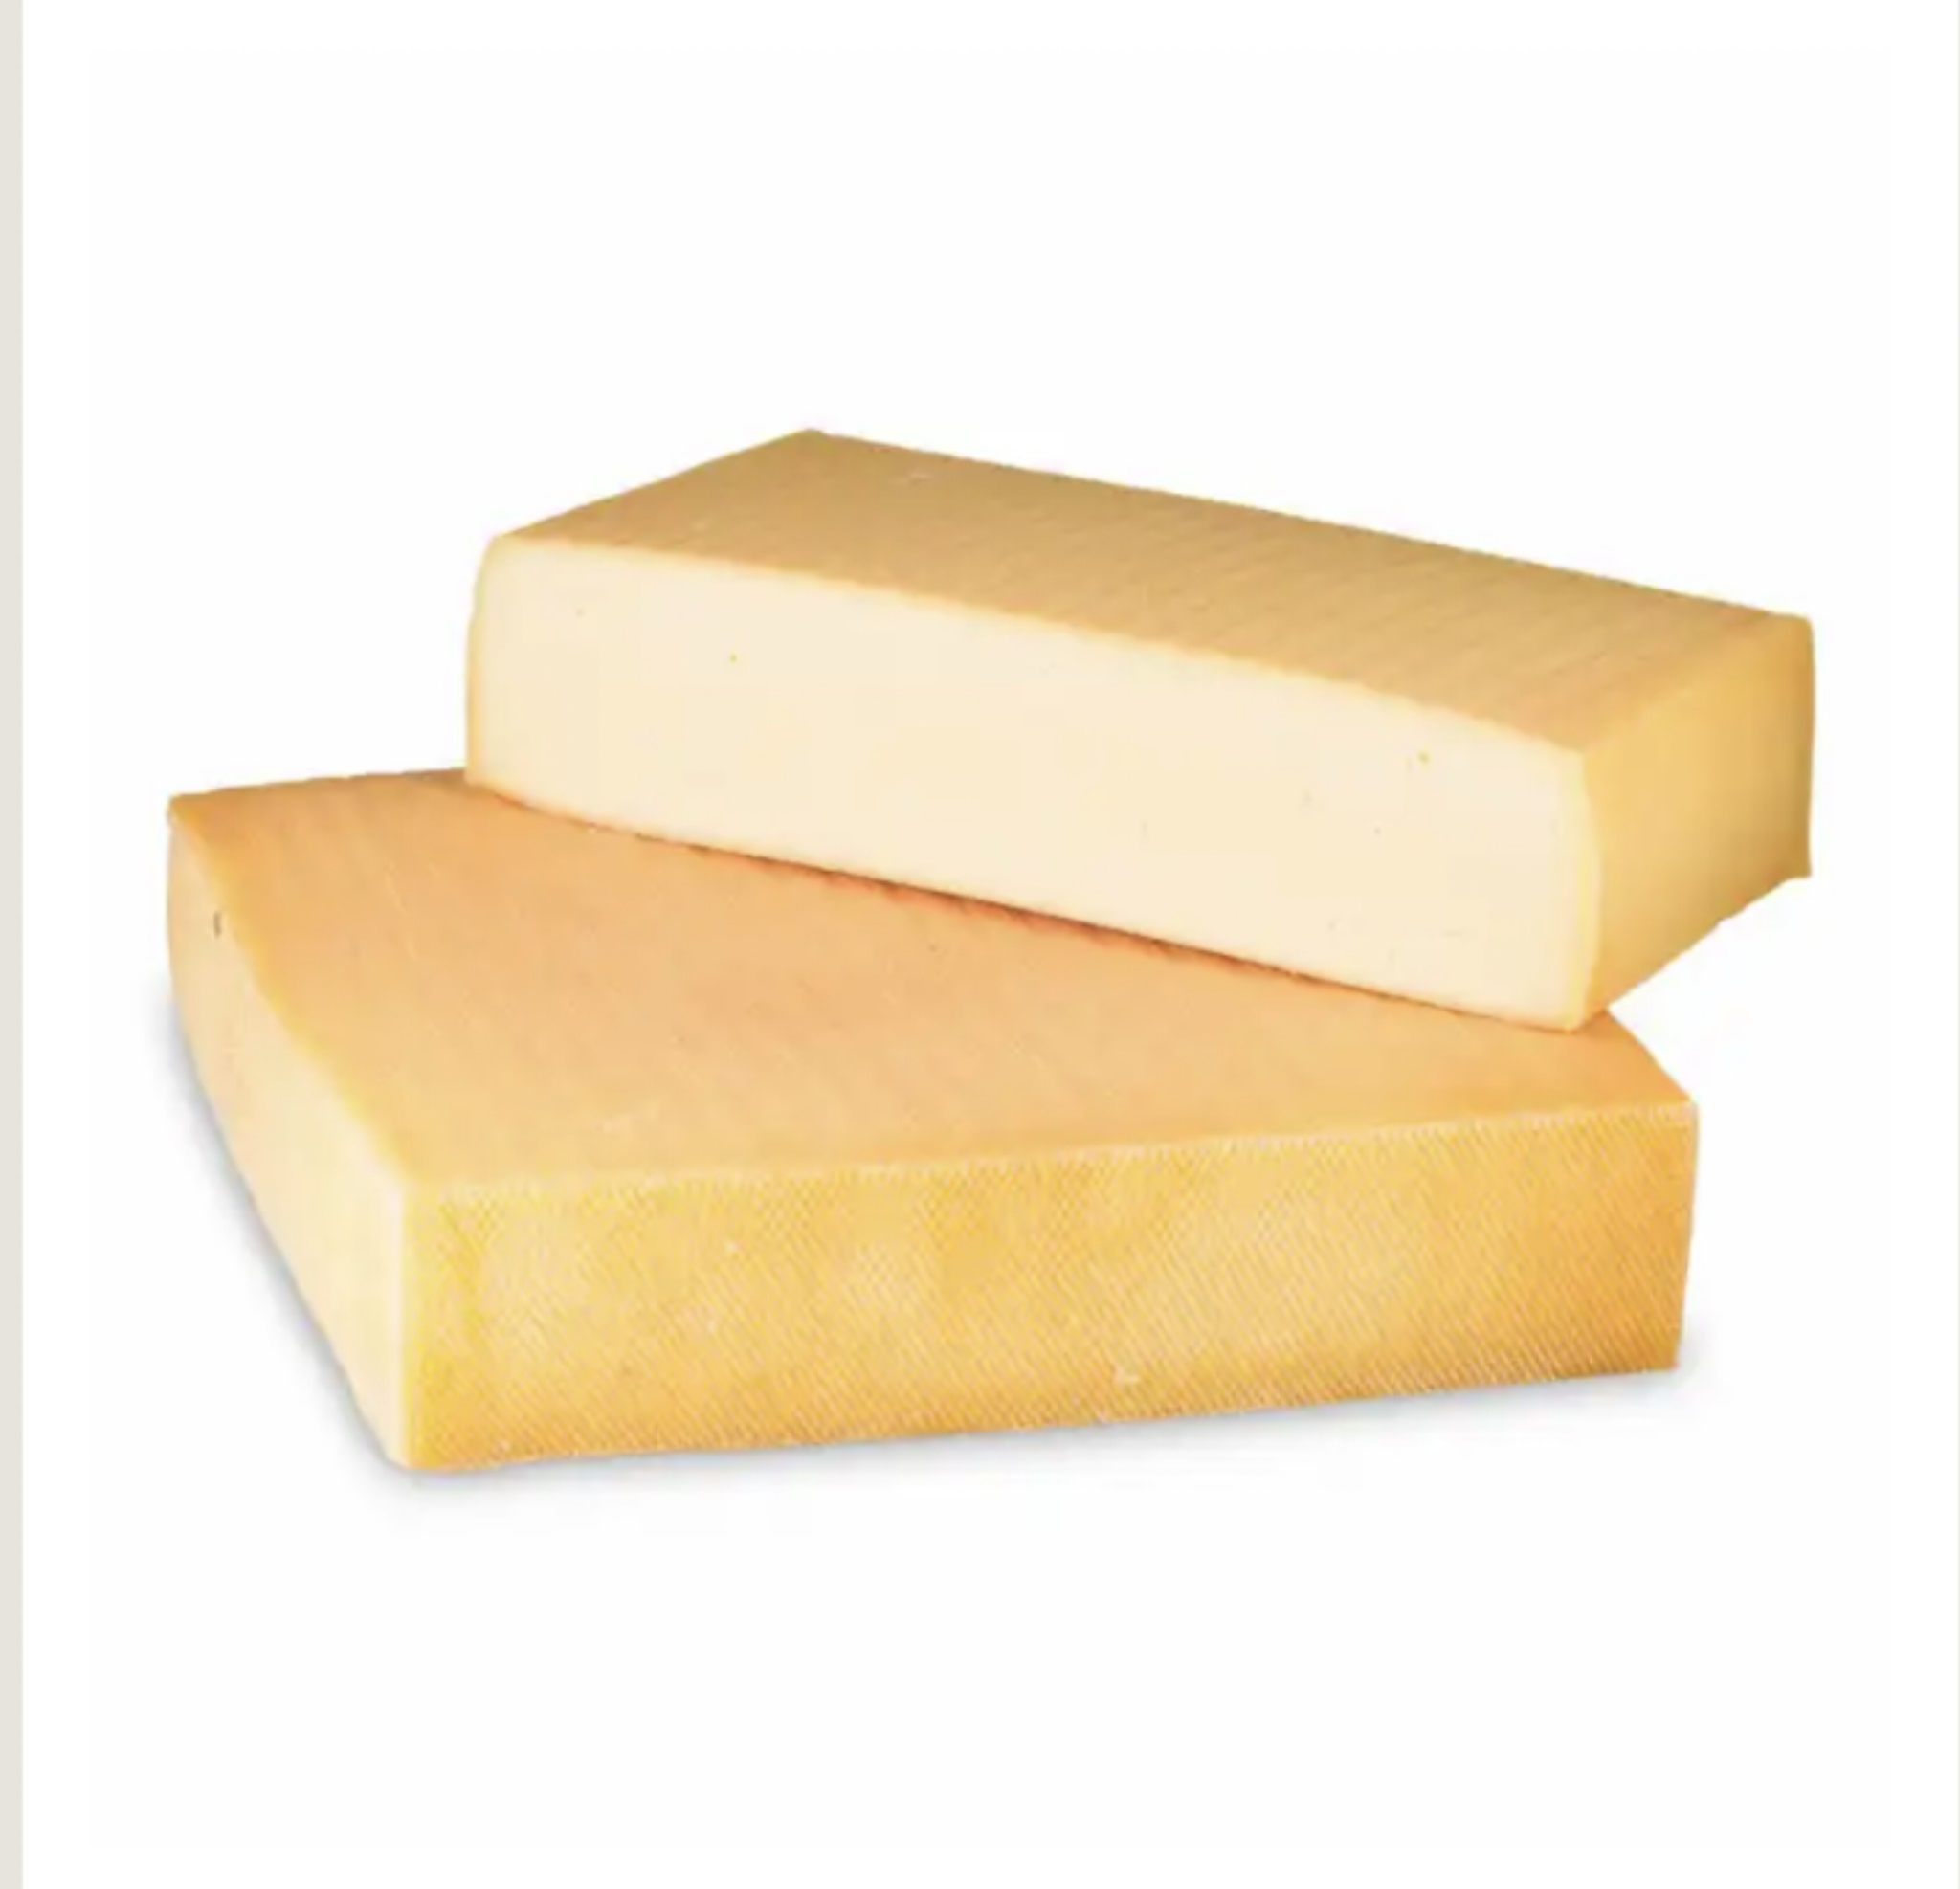 Cheese Raclette 1/10lb Bargain - Sold by PACK